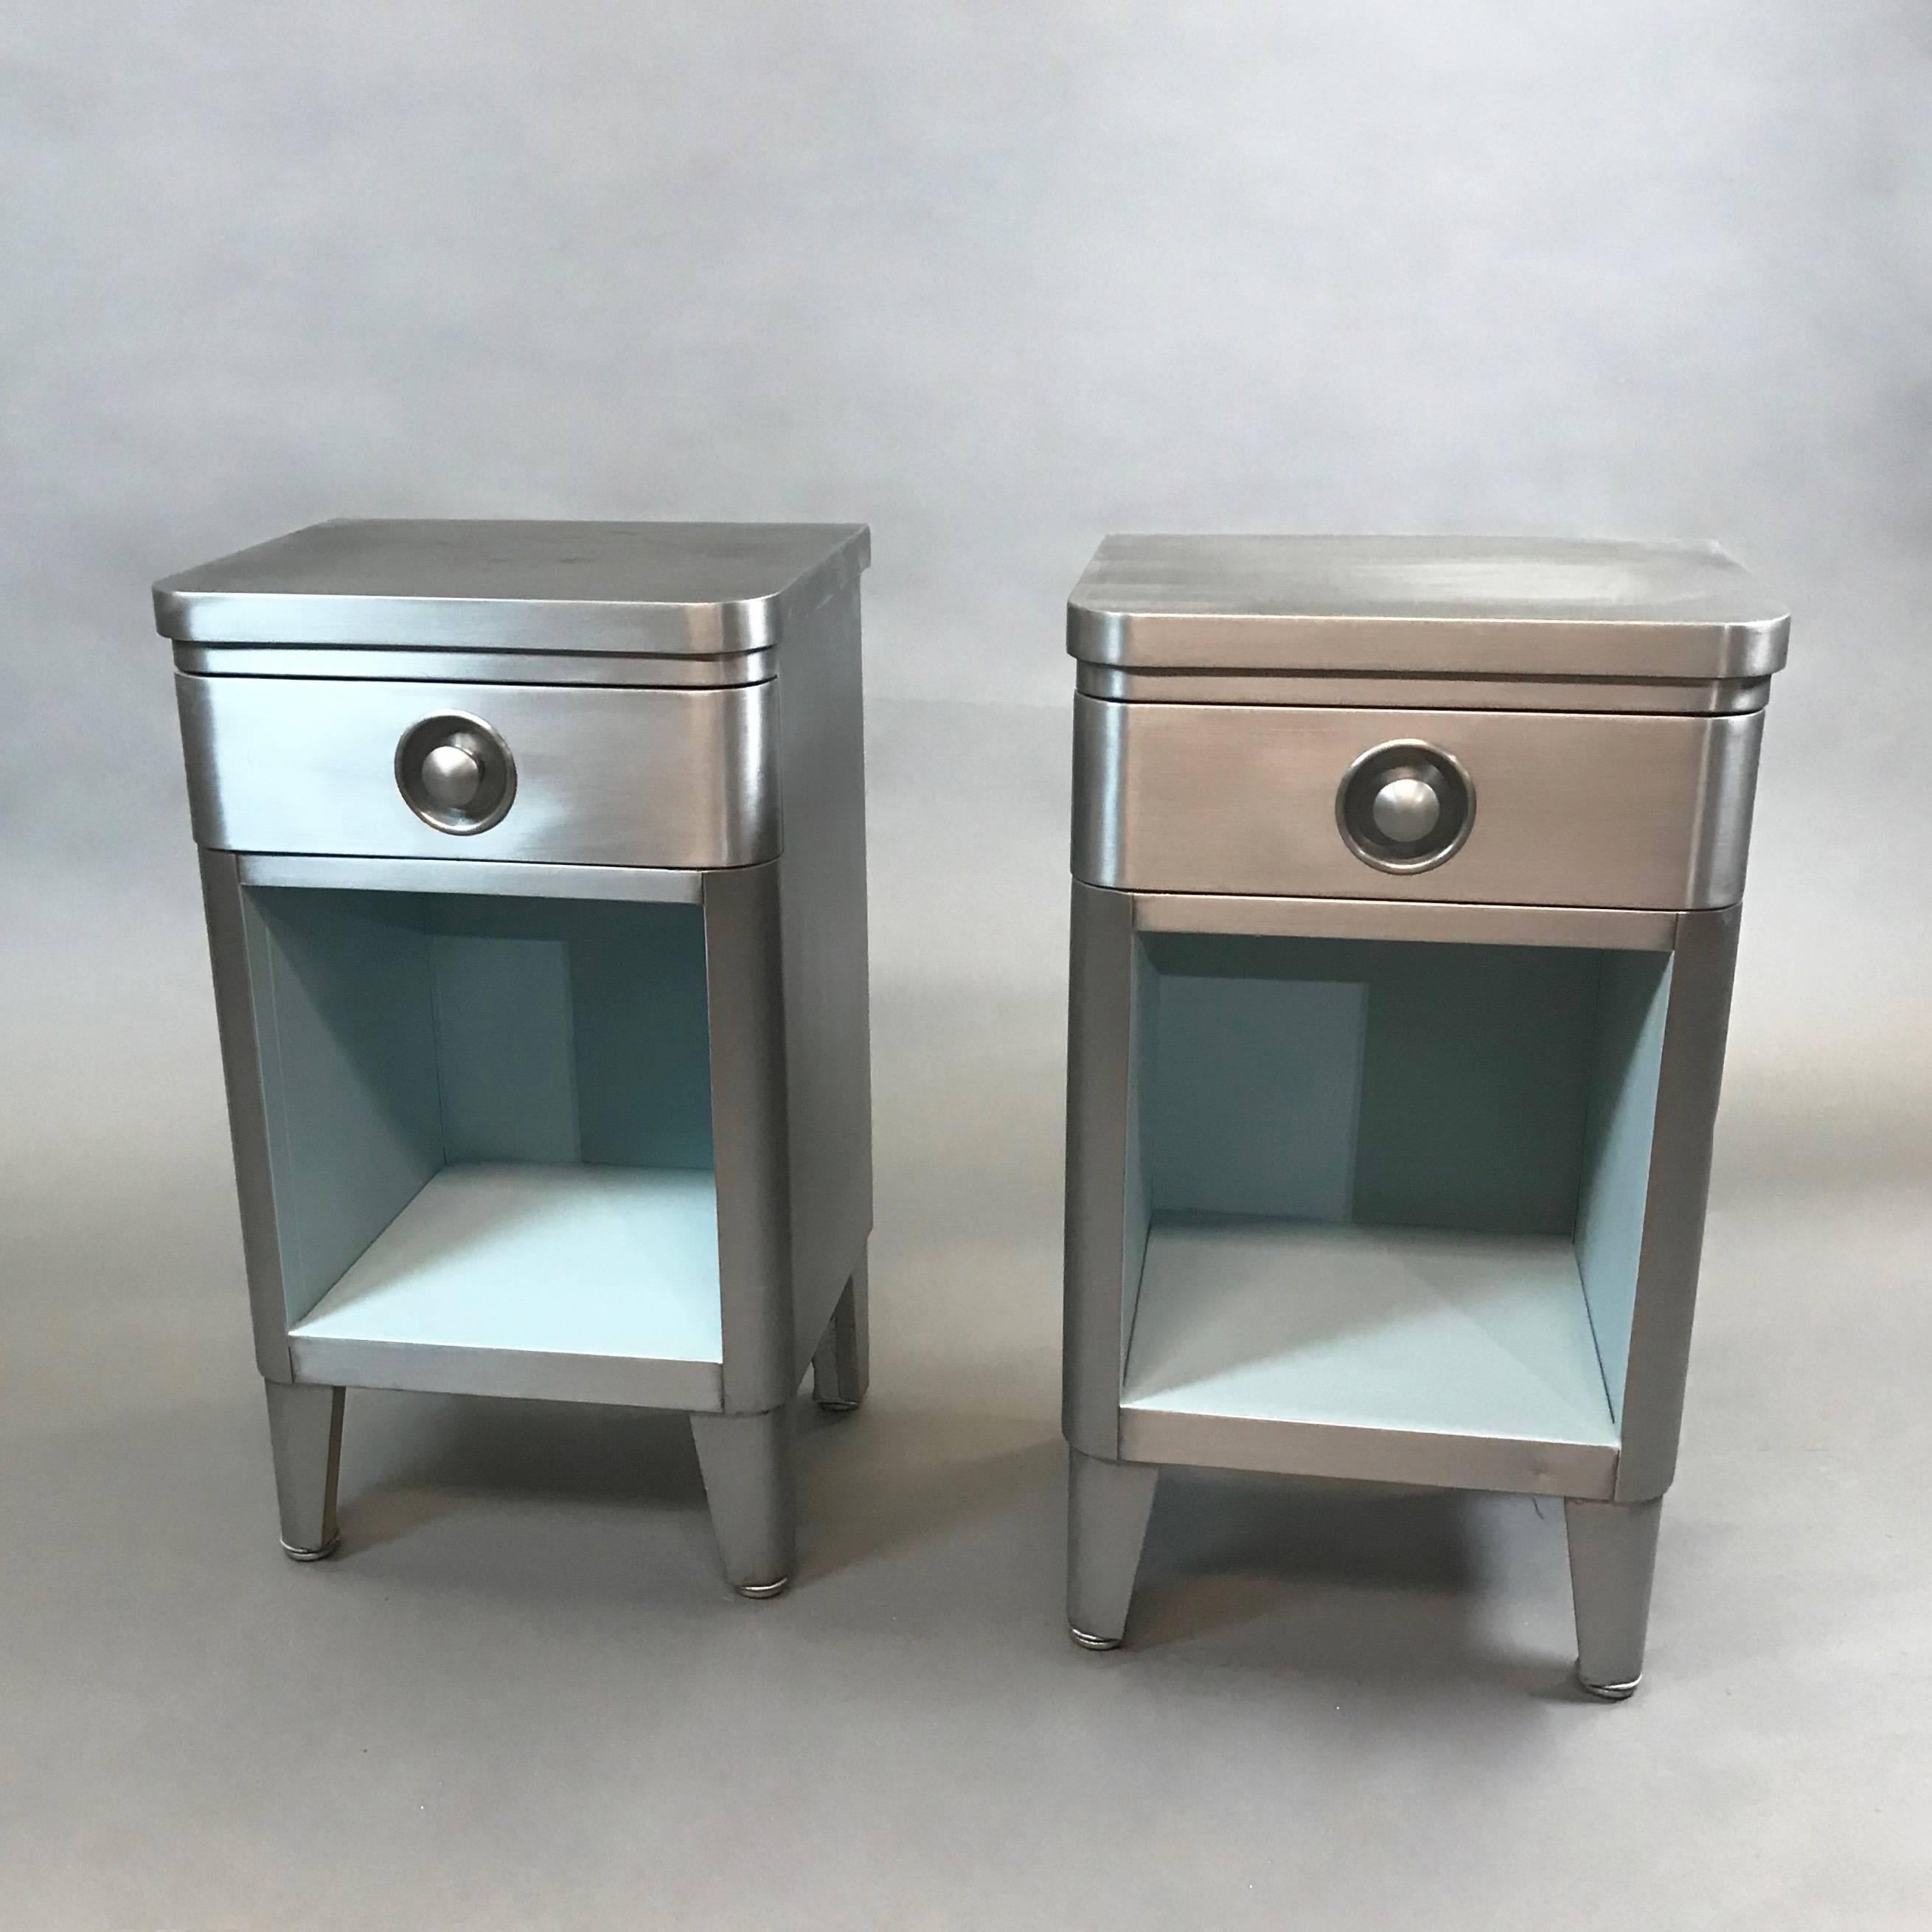 Pair of machine-age, Art Deco, Industrial, brushed steel nightstands or end tables by Norman Bel Geddes for Simmons Furniture with recessed pulls and contrasting powder blue interiors.